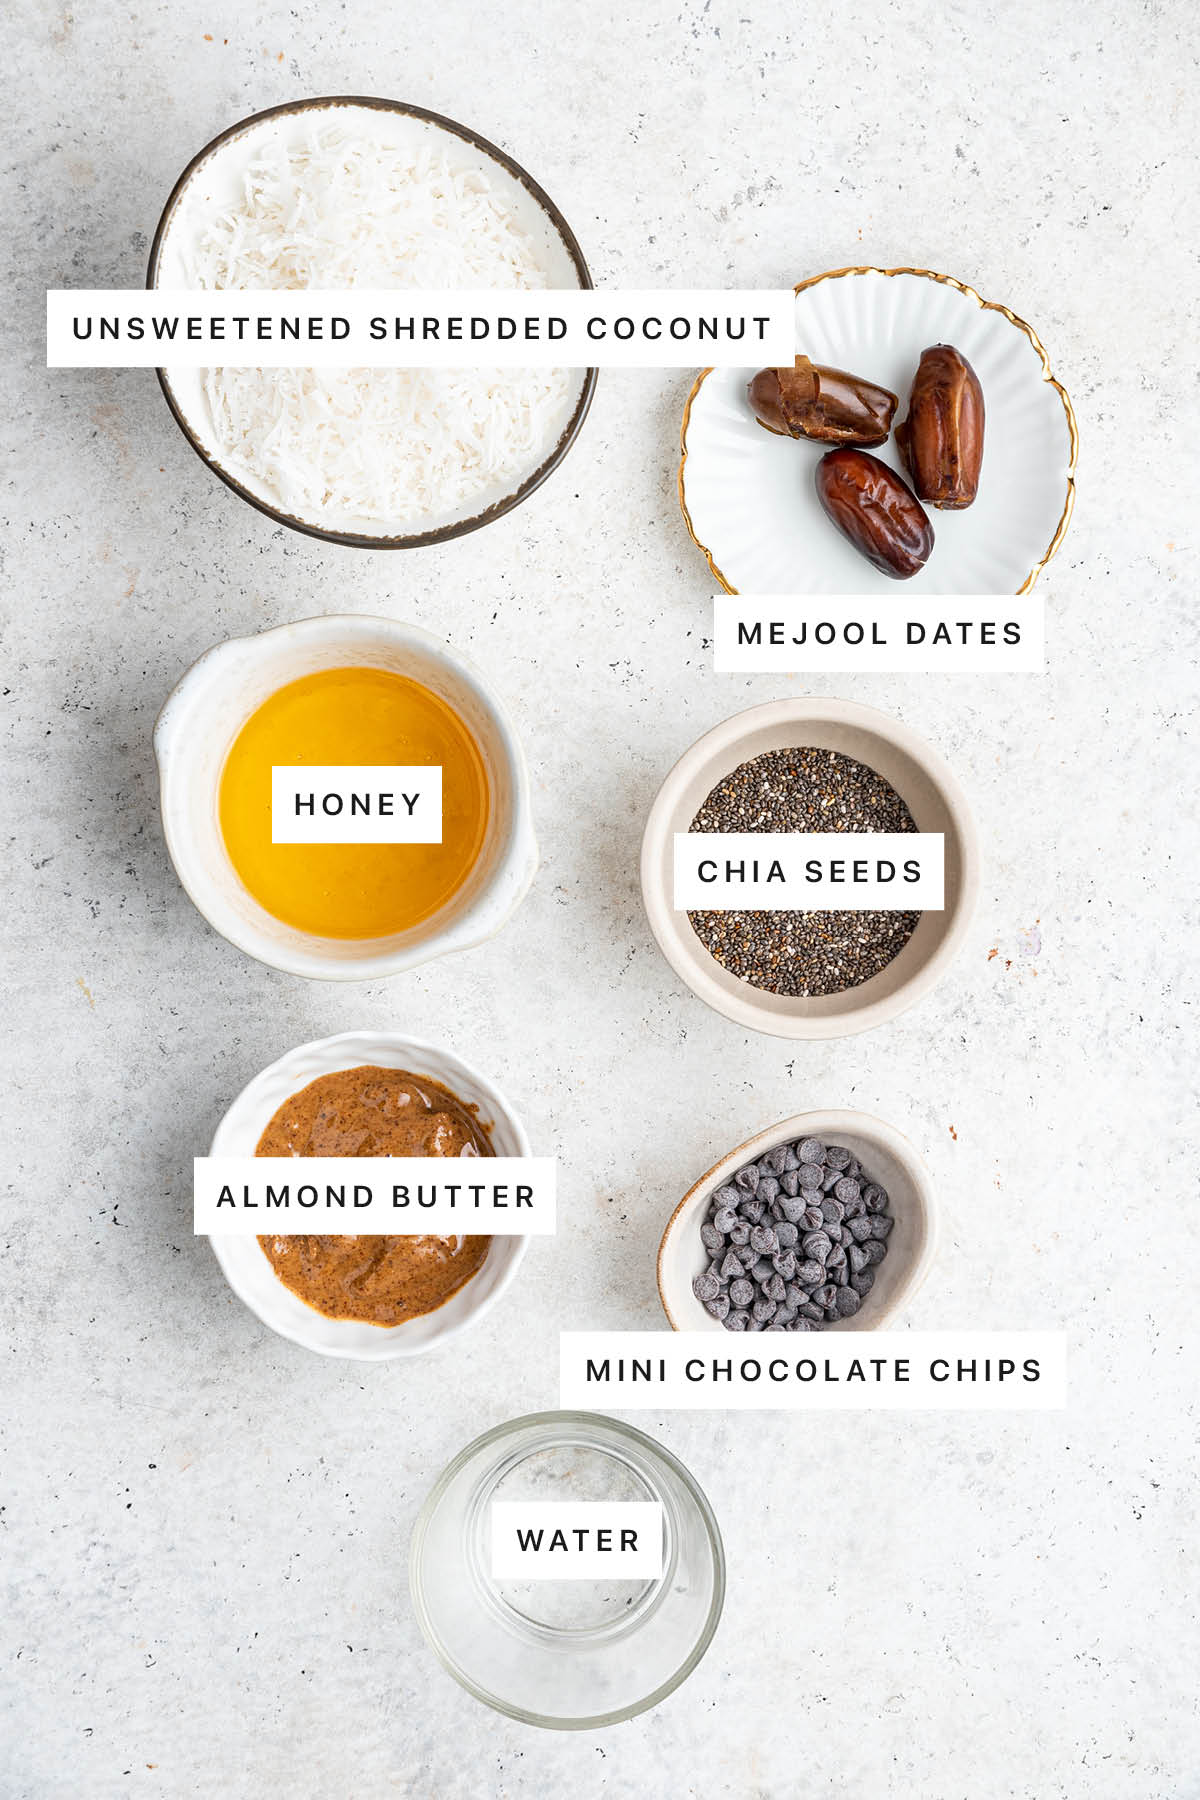 Ingredients measured out to make Toasted Coconut Chia Bars: unsweetened shredded coconut, medjool dates, honey, chia seeds, almond butter, mini chocolate chips and water.